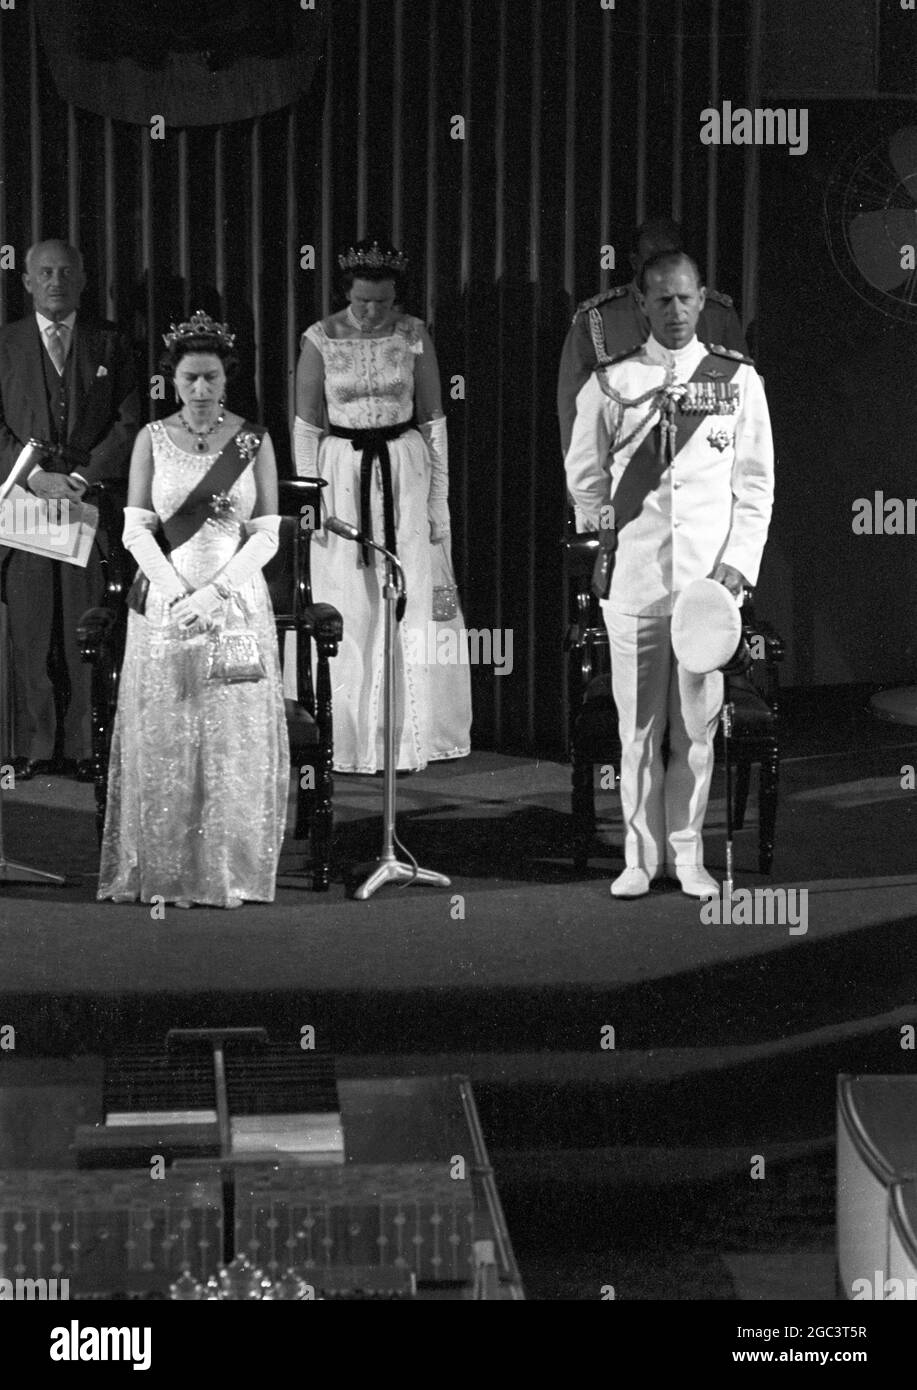 Queen opens Jamaican Parliament . HM Queen Elizabeth II with Prince Philip, Duke of Edinburgh beside her formerly opens the Jamaican Parliament in Gordon House, Kingston during the Royal three-day visit to Jamaica . Seen in the background left to right are Sir Michael Adeane , the Queen's Private Secretary ; Lady-in-waiting Marchioness of Abergavenny and Jamaican Equerry Major Trevor Robinson 8 March 1966 Stock Photo